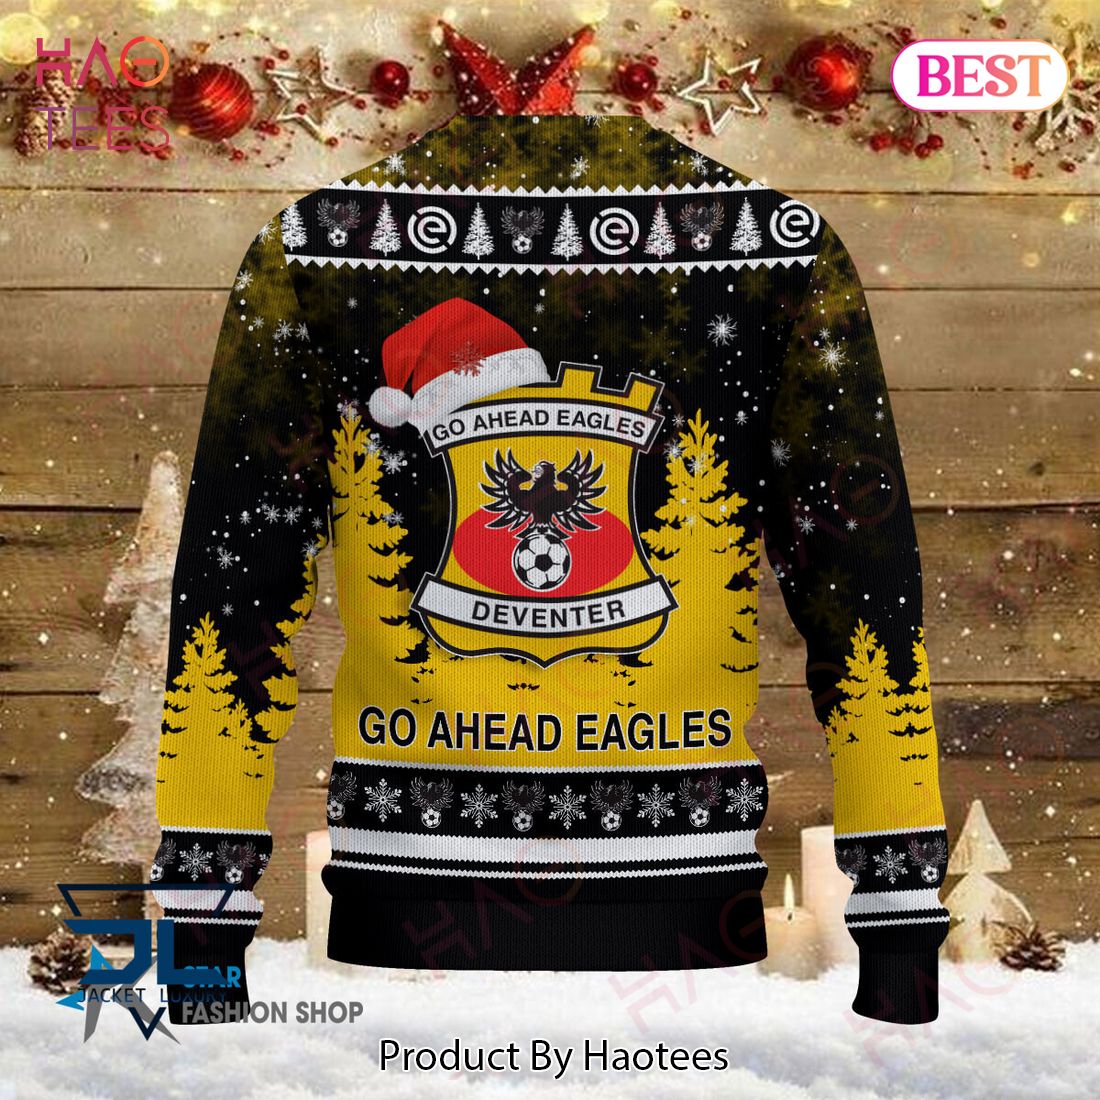 BEST Go Ahead Eagles Luxury Brand Sweater Limited Edition